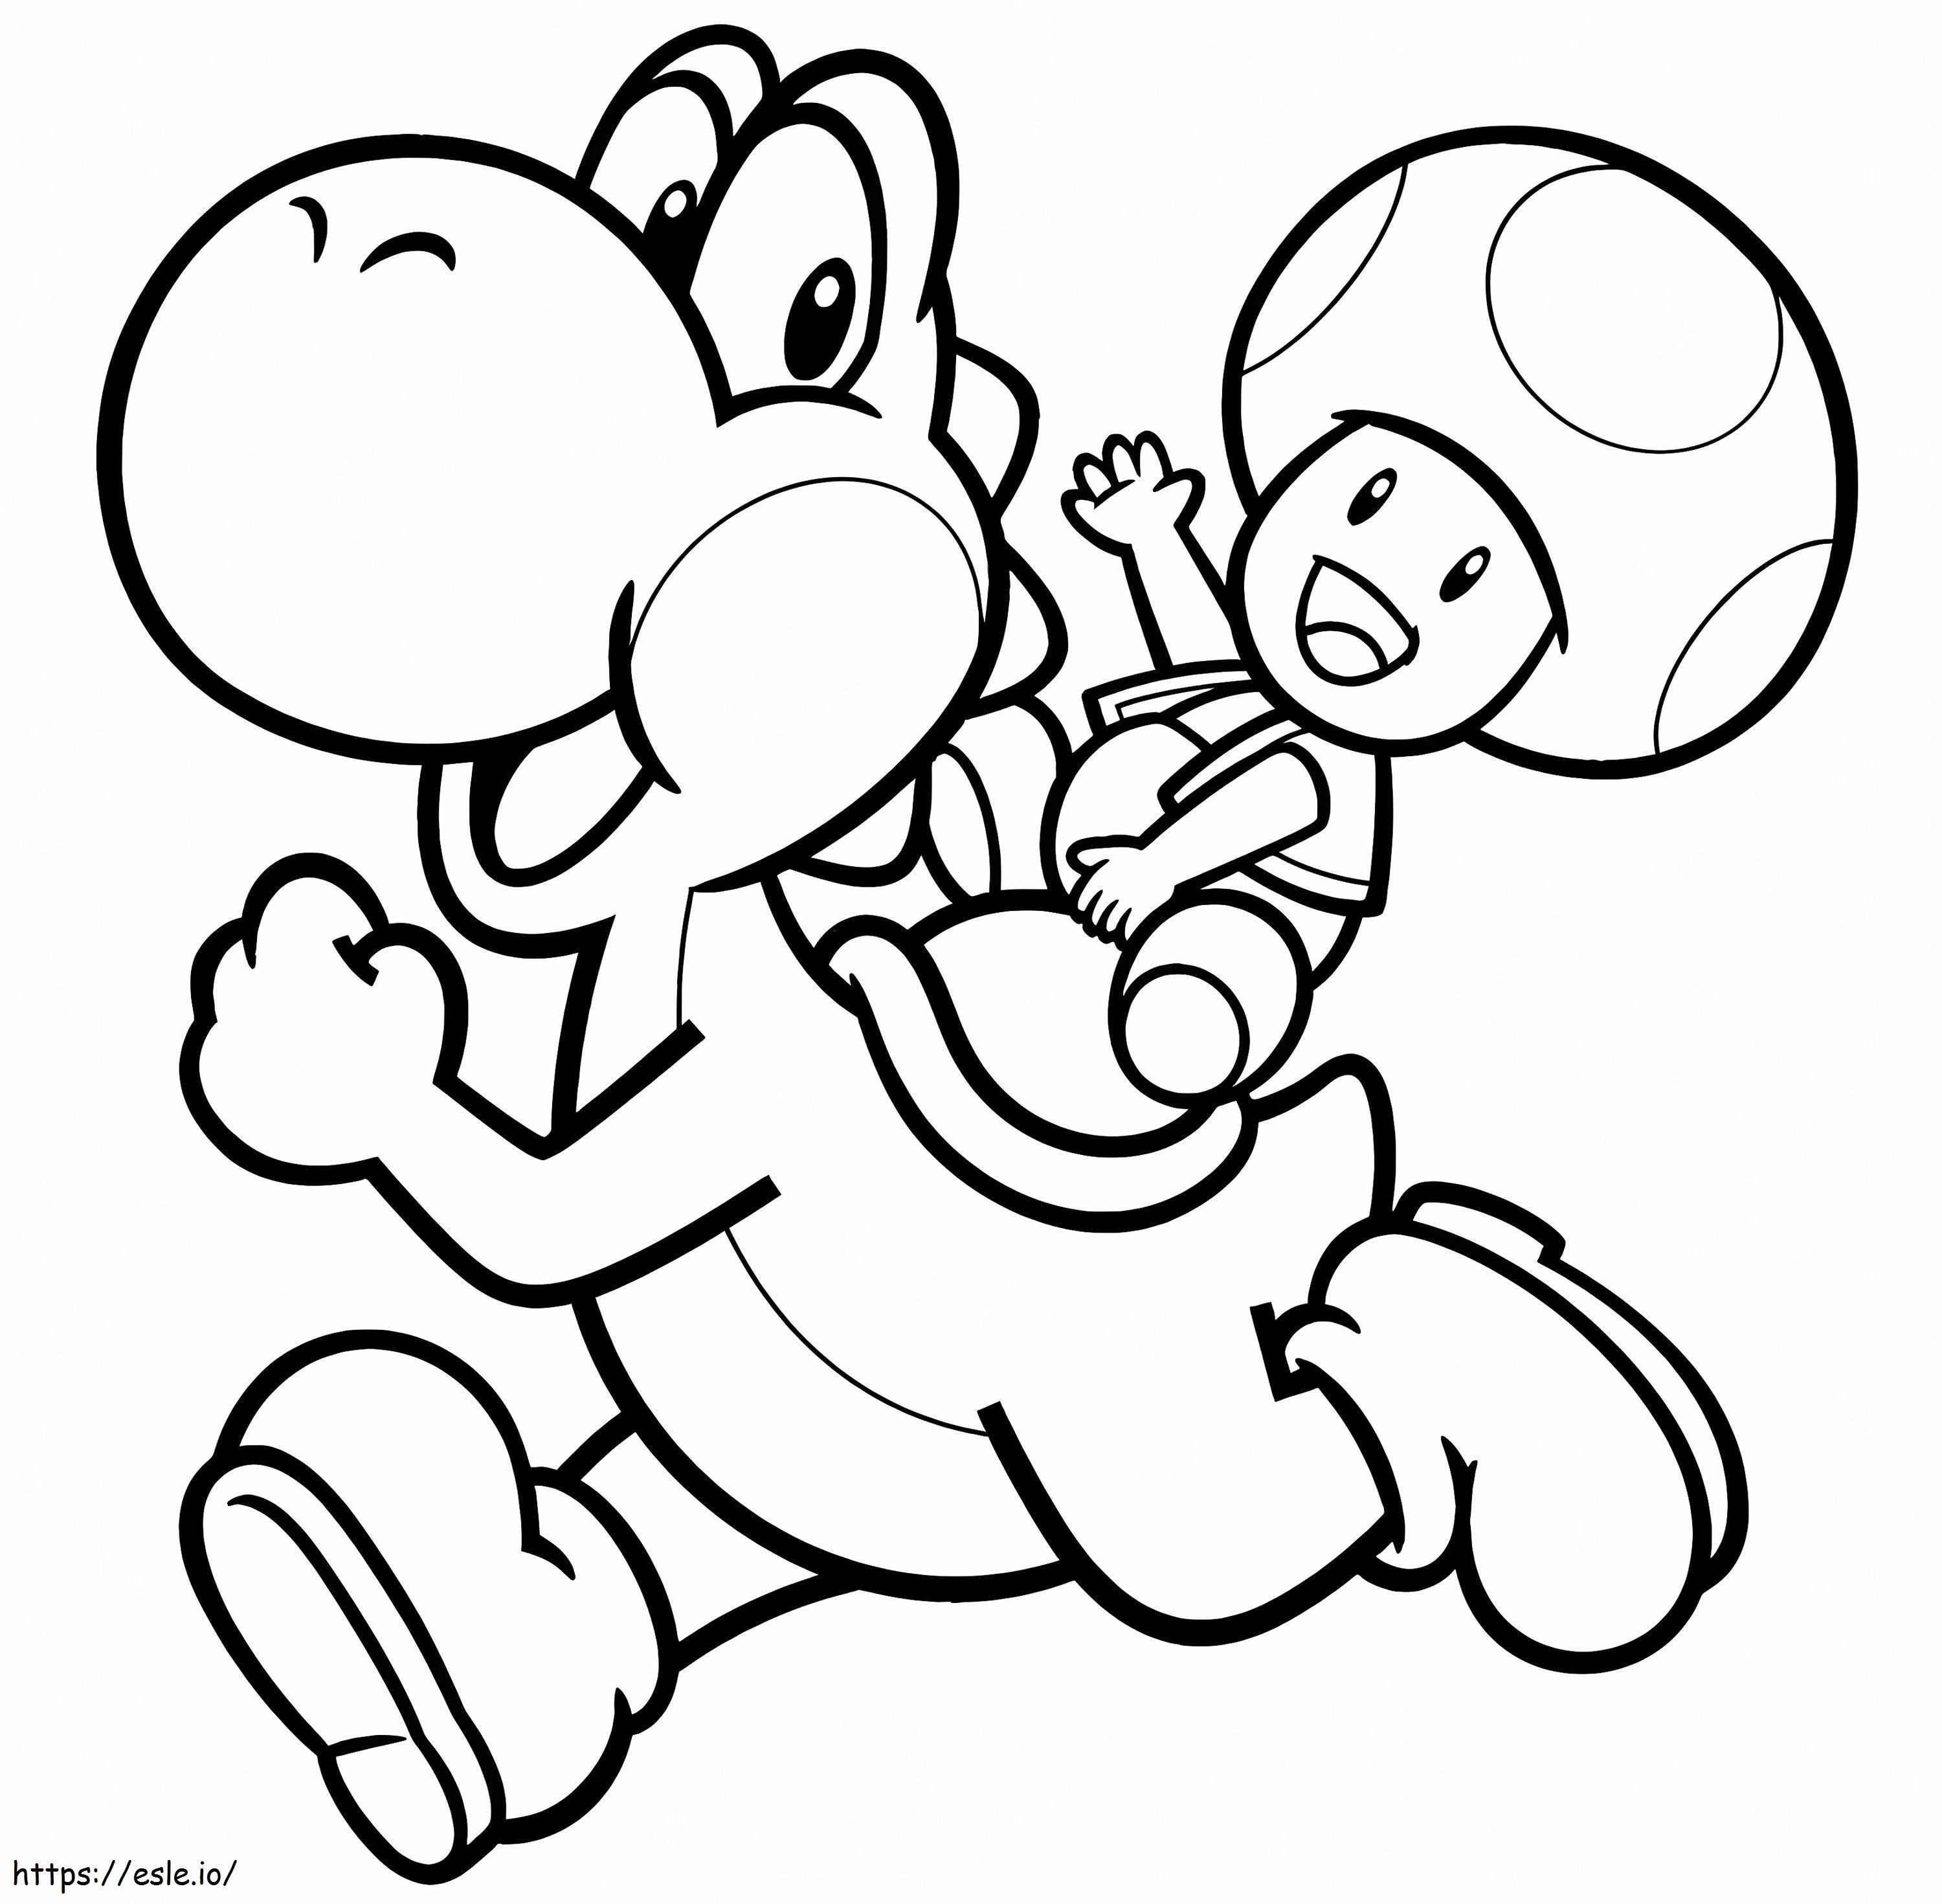 Yoshi Et Toad coloring page